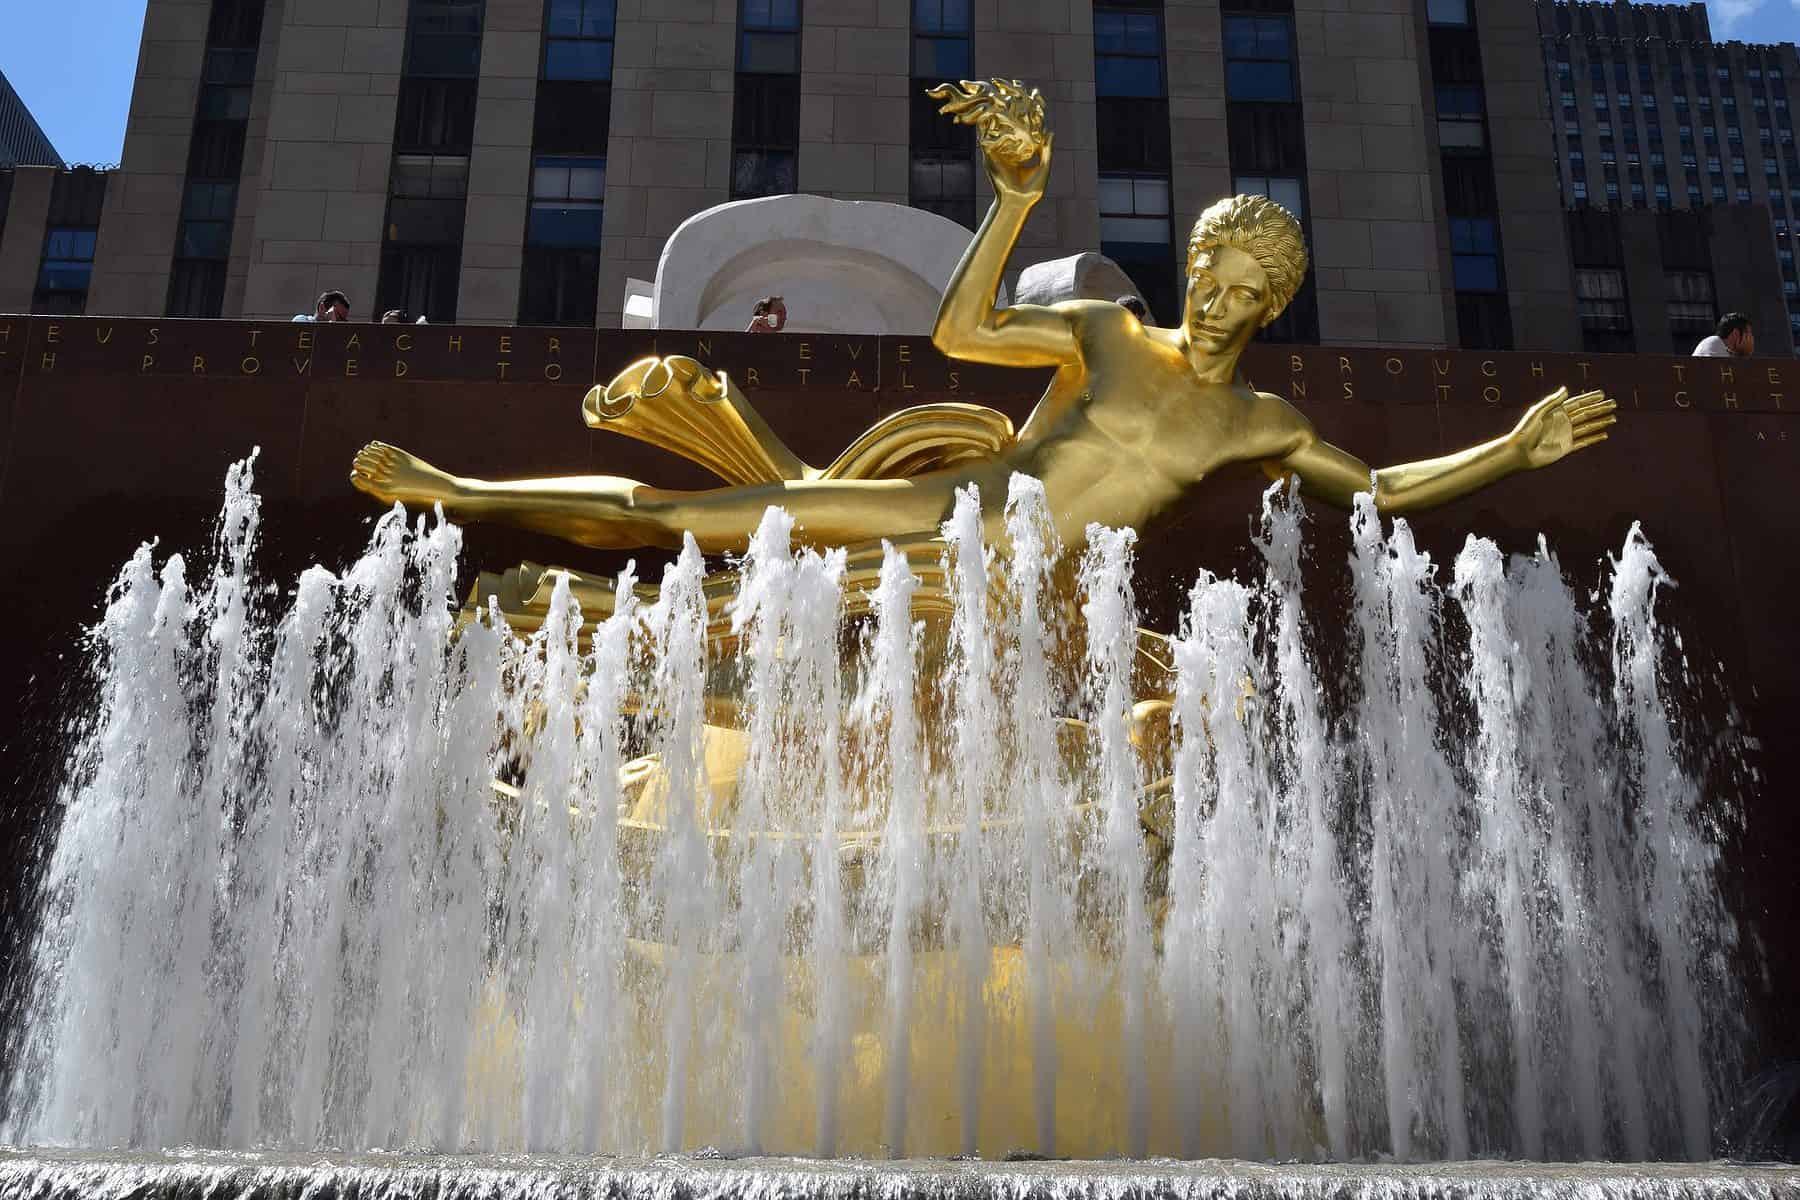 The Prometheus Fountain in front of Rockefeller Center. Image source: Pixabay user Herve Borg.